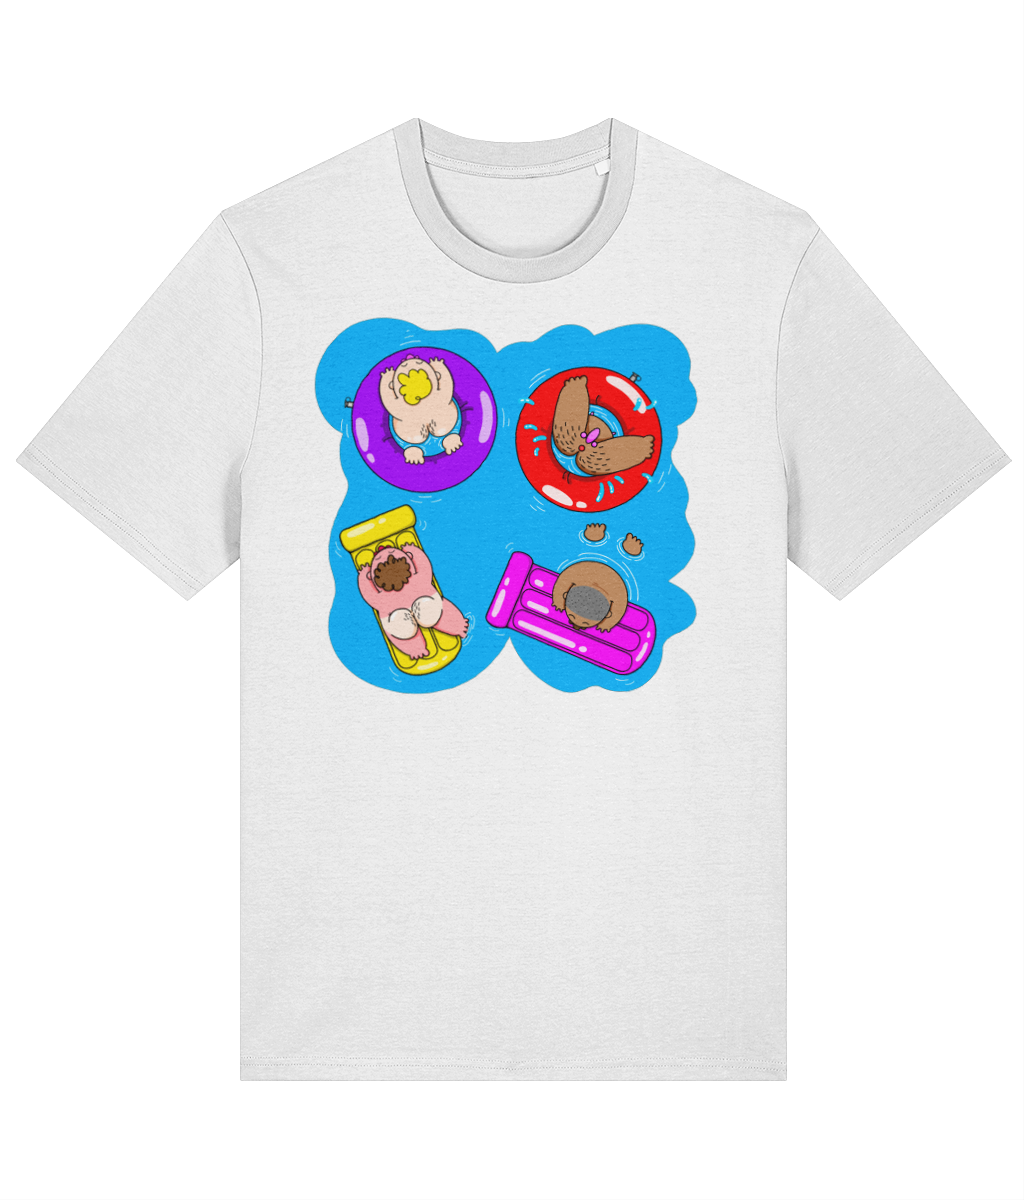 Pool Party T-Shirt